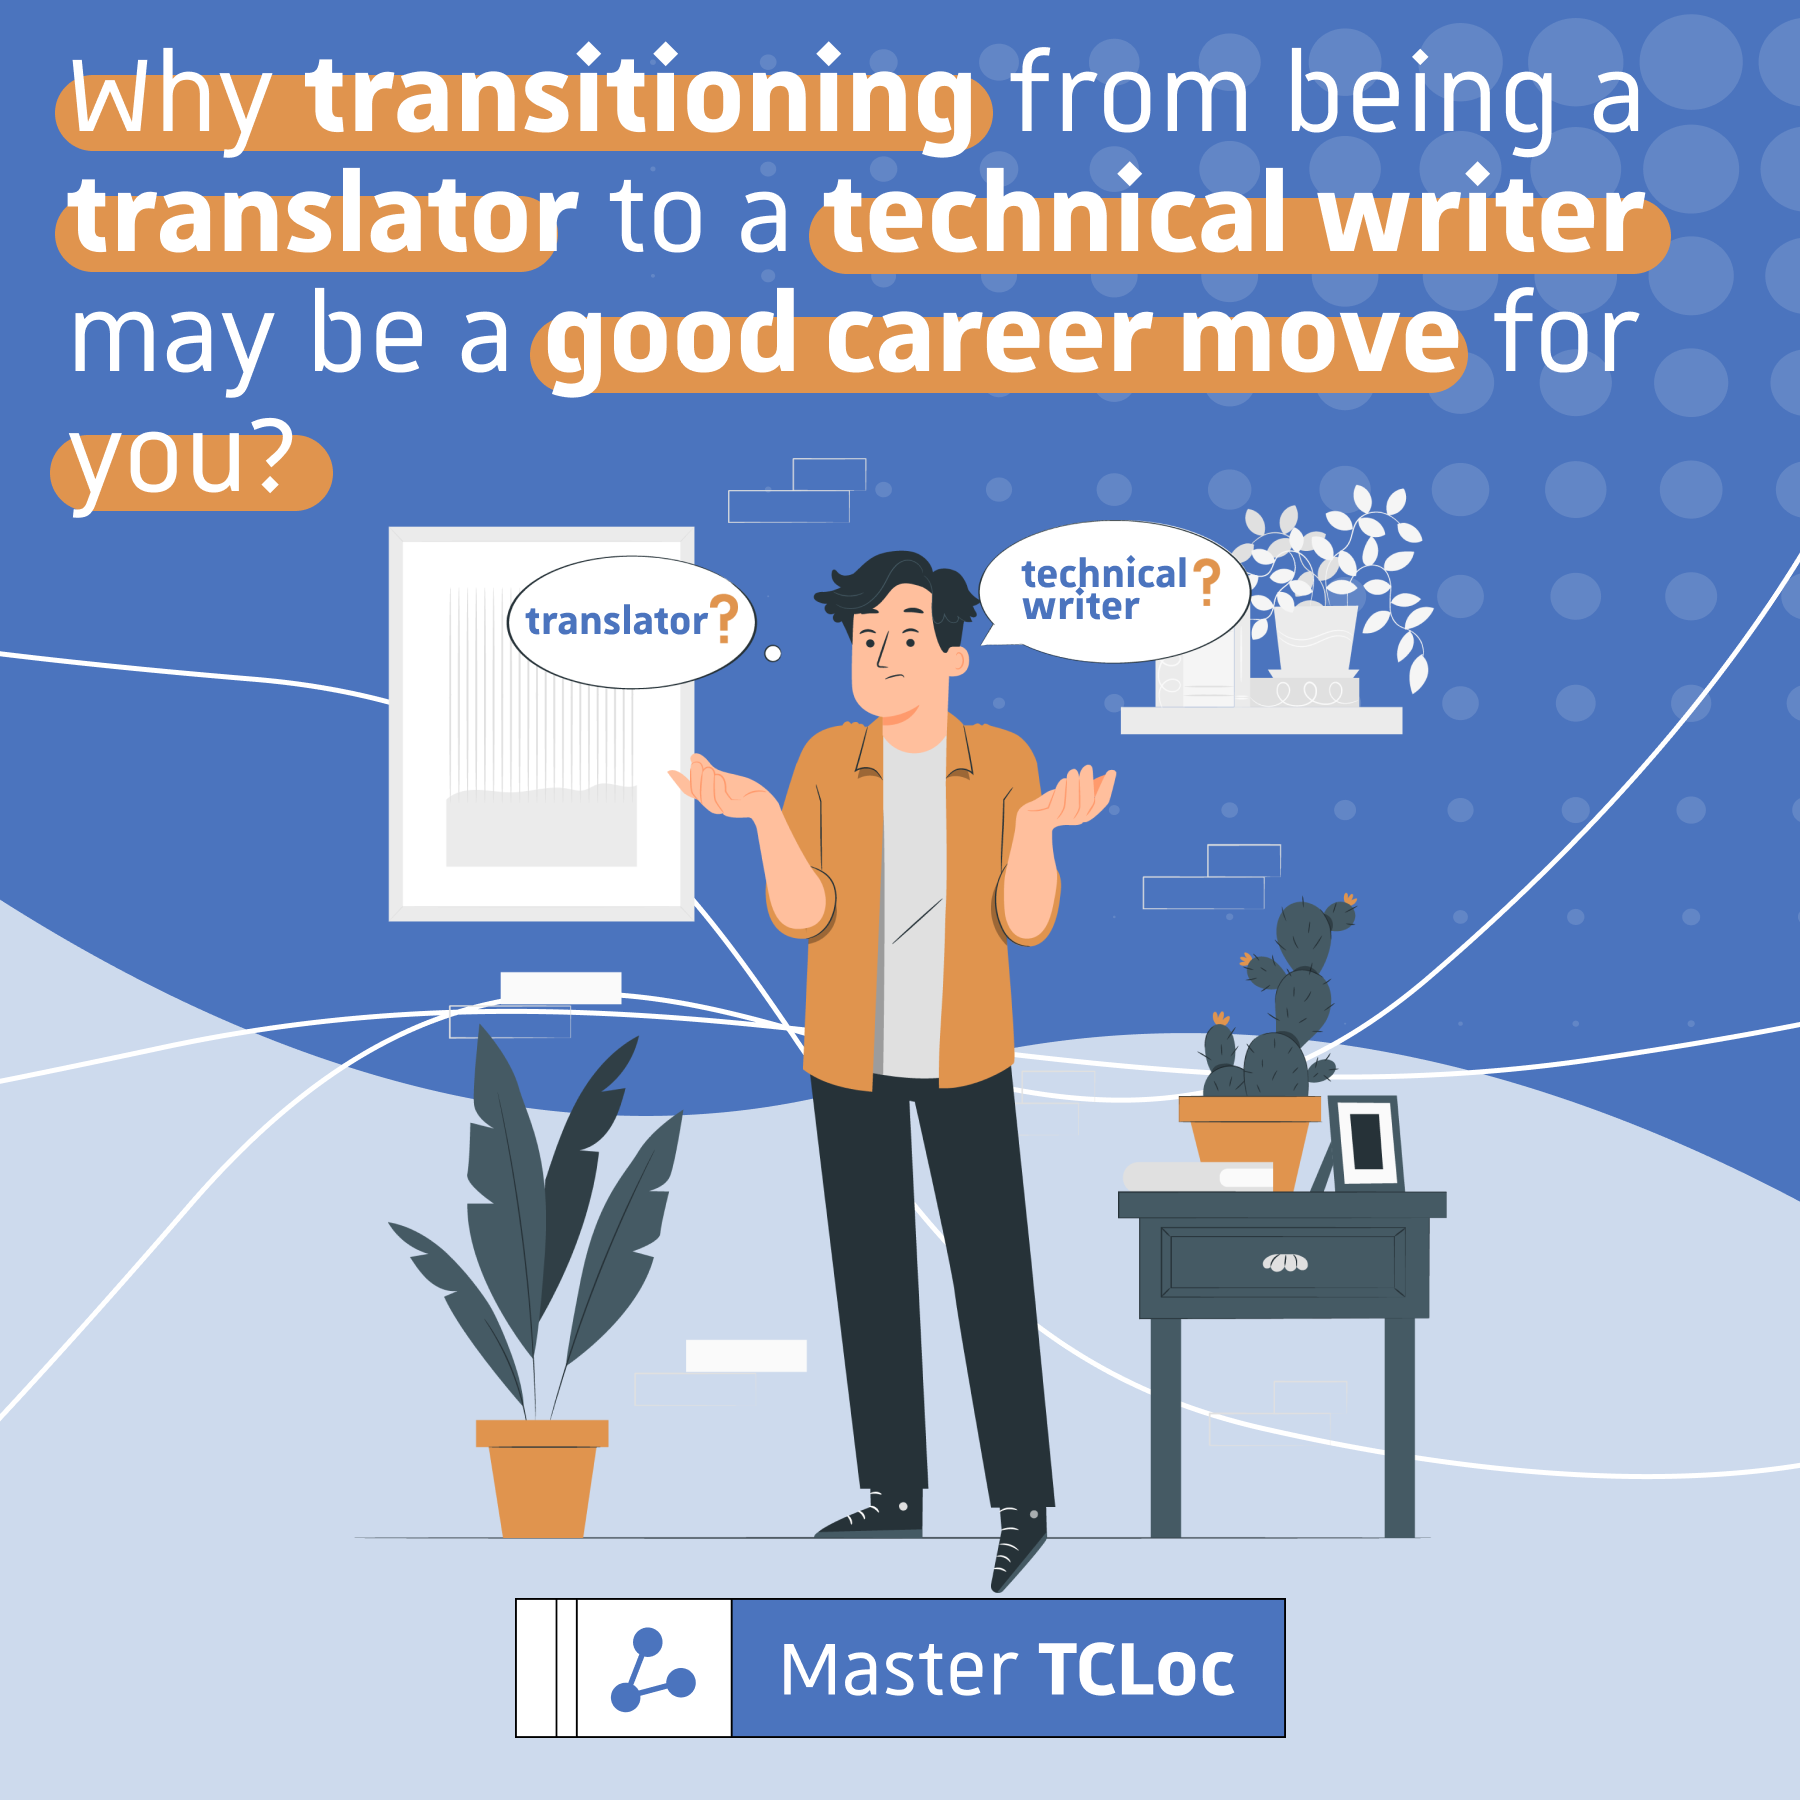 Why transitioning from being a translator to a technical writer could be a good career move for you